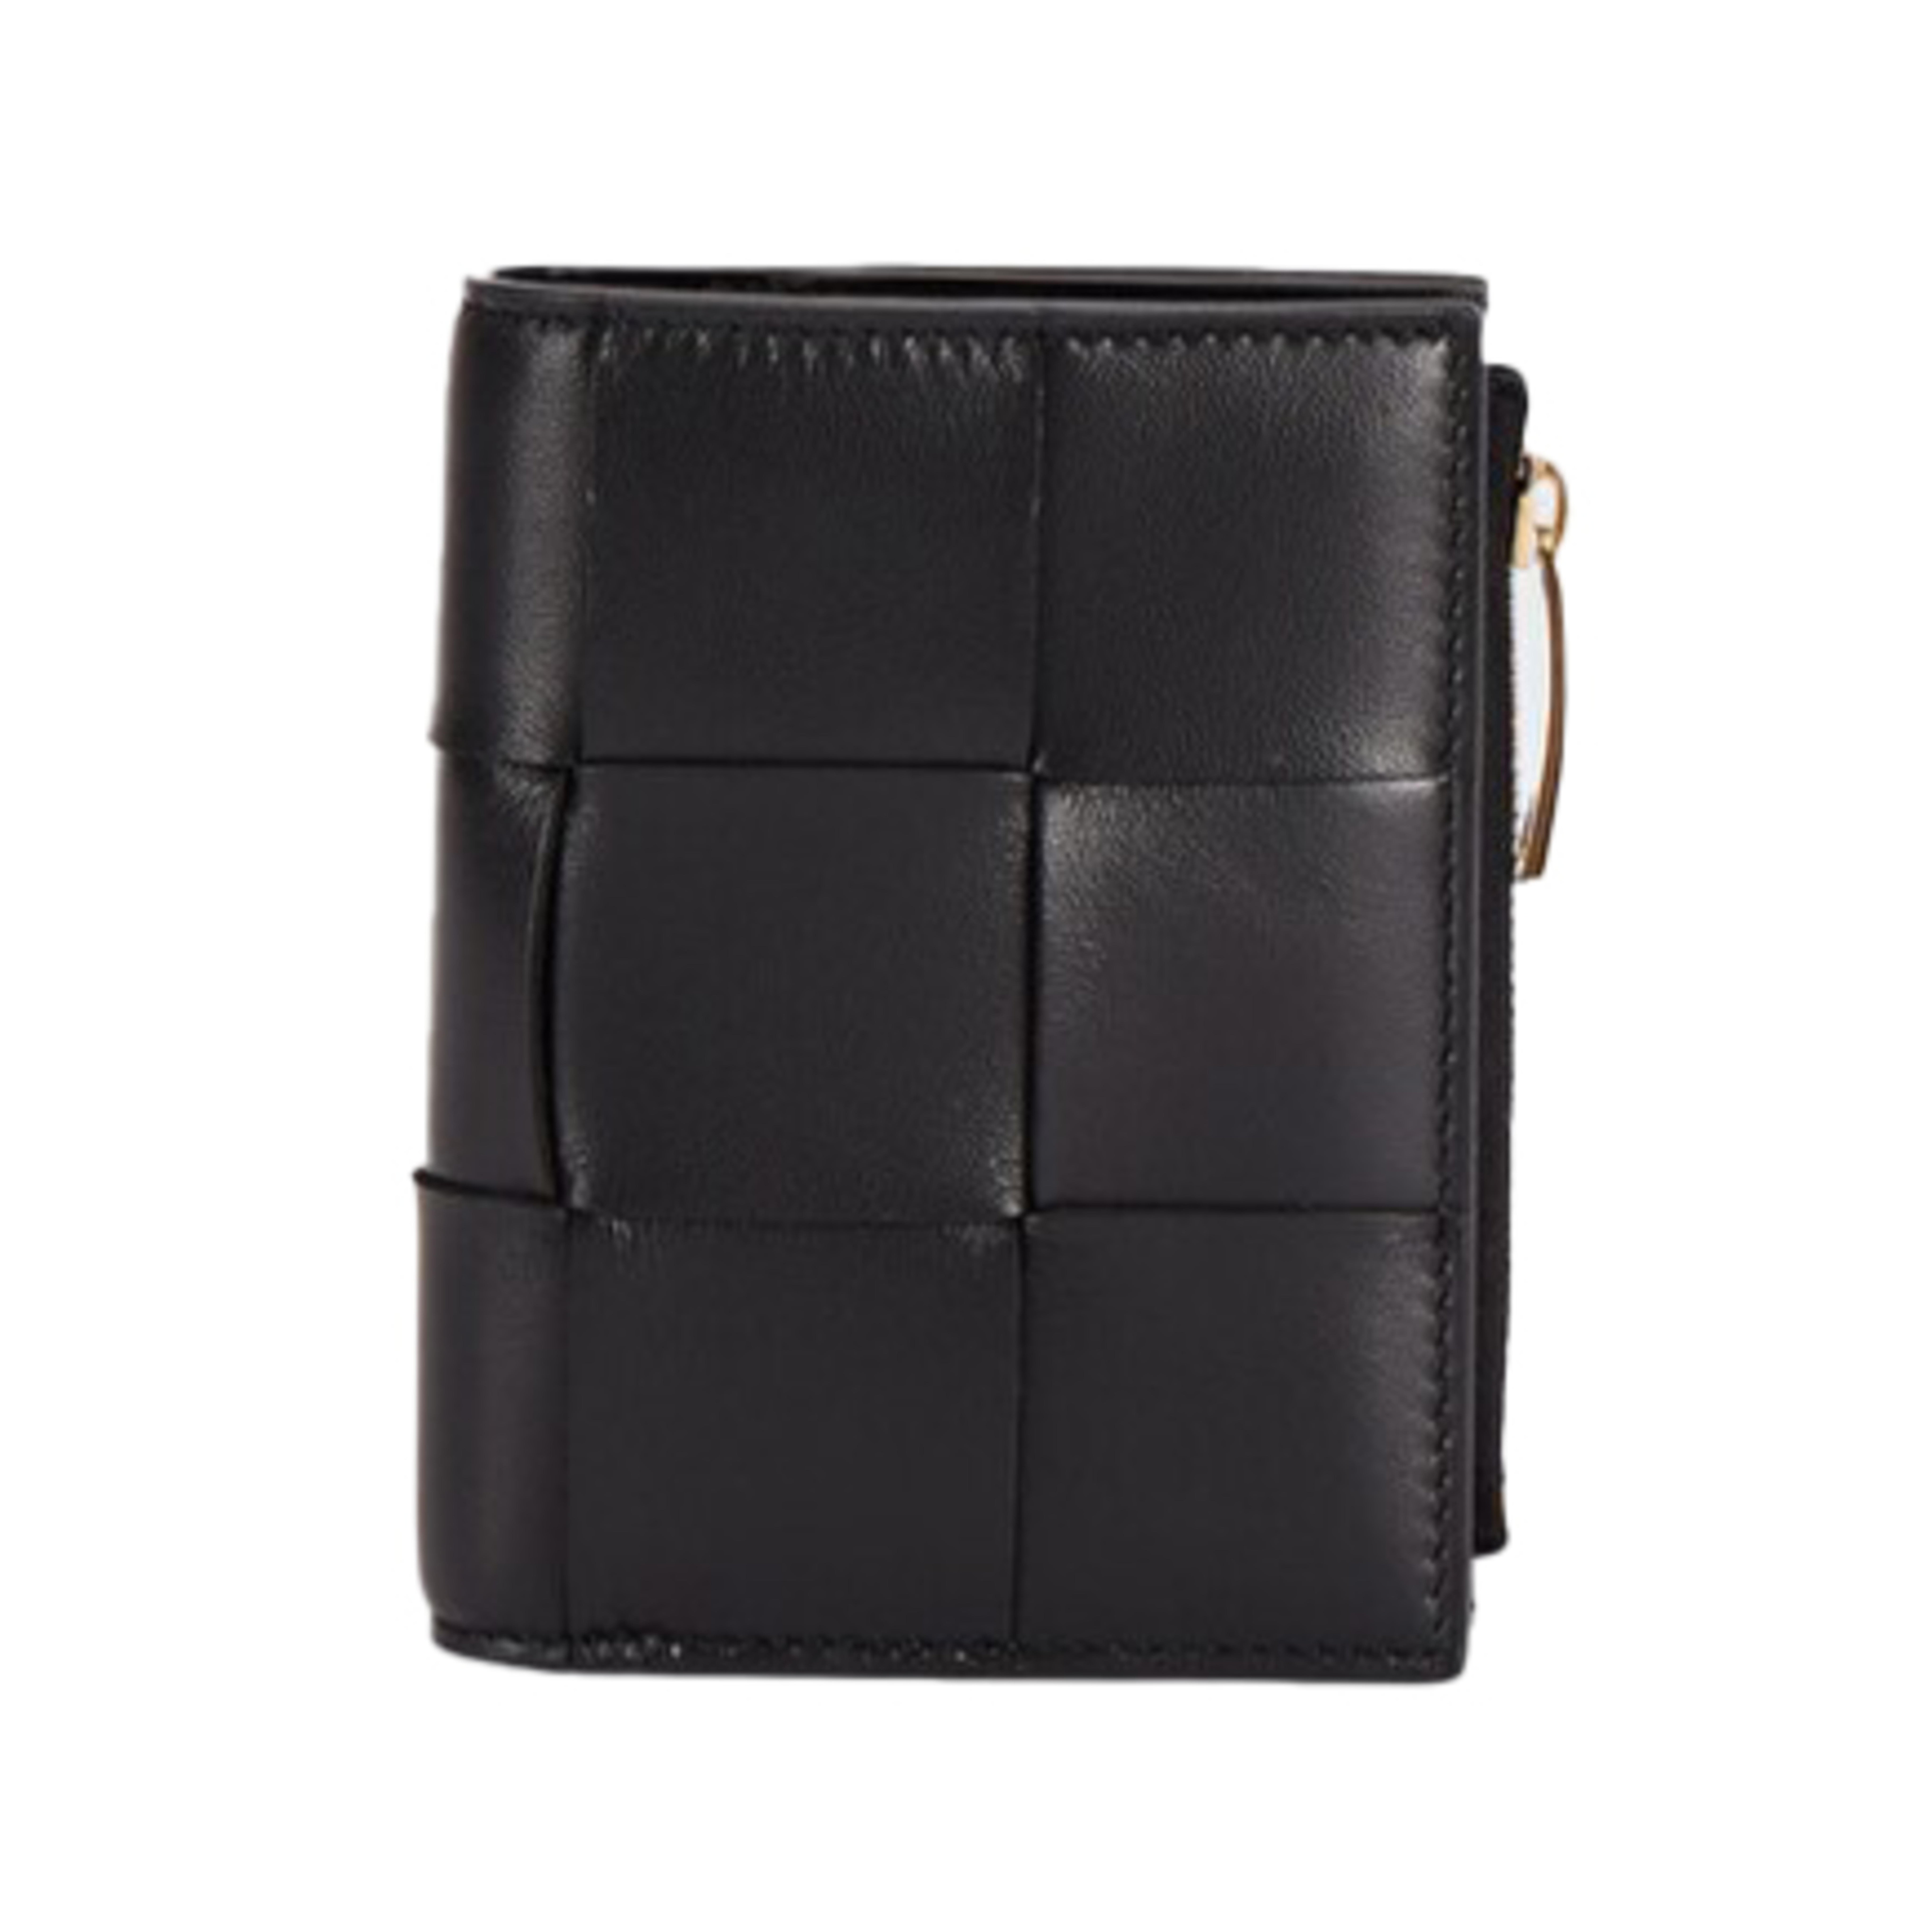 New Bottega Veneta Black Woven Leather Bifold Wallet

Authenticity Guaranteed

DETAILS
Brand: Bottega Veneta
Condition: Brand new
Gender: Unisex
Category: Wallet
Color: Black
Material: Leather
Woven leather
Gold-tone hardware
Snap button closure
1